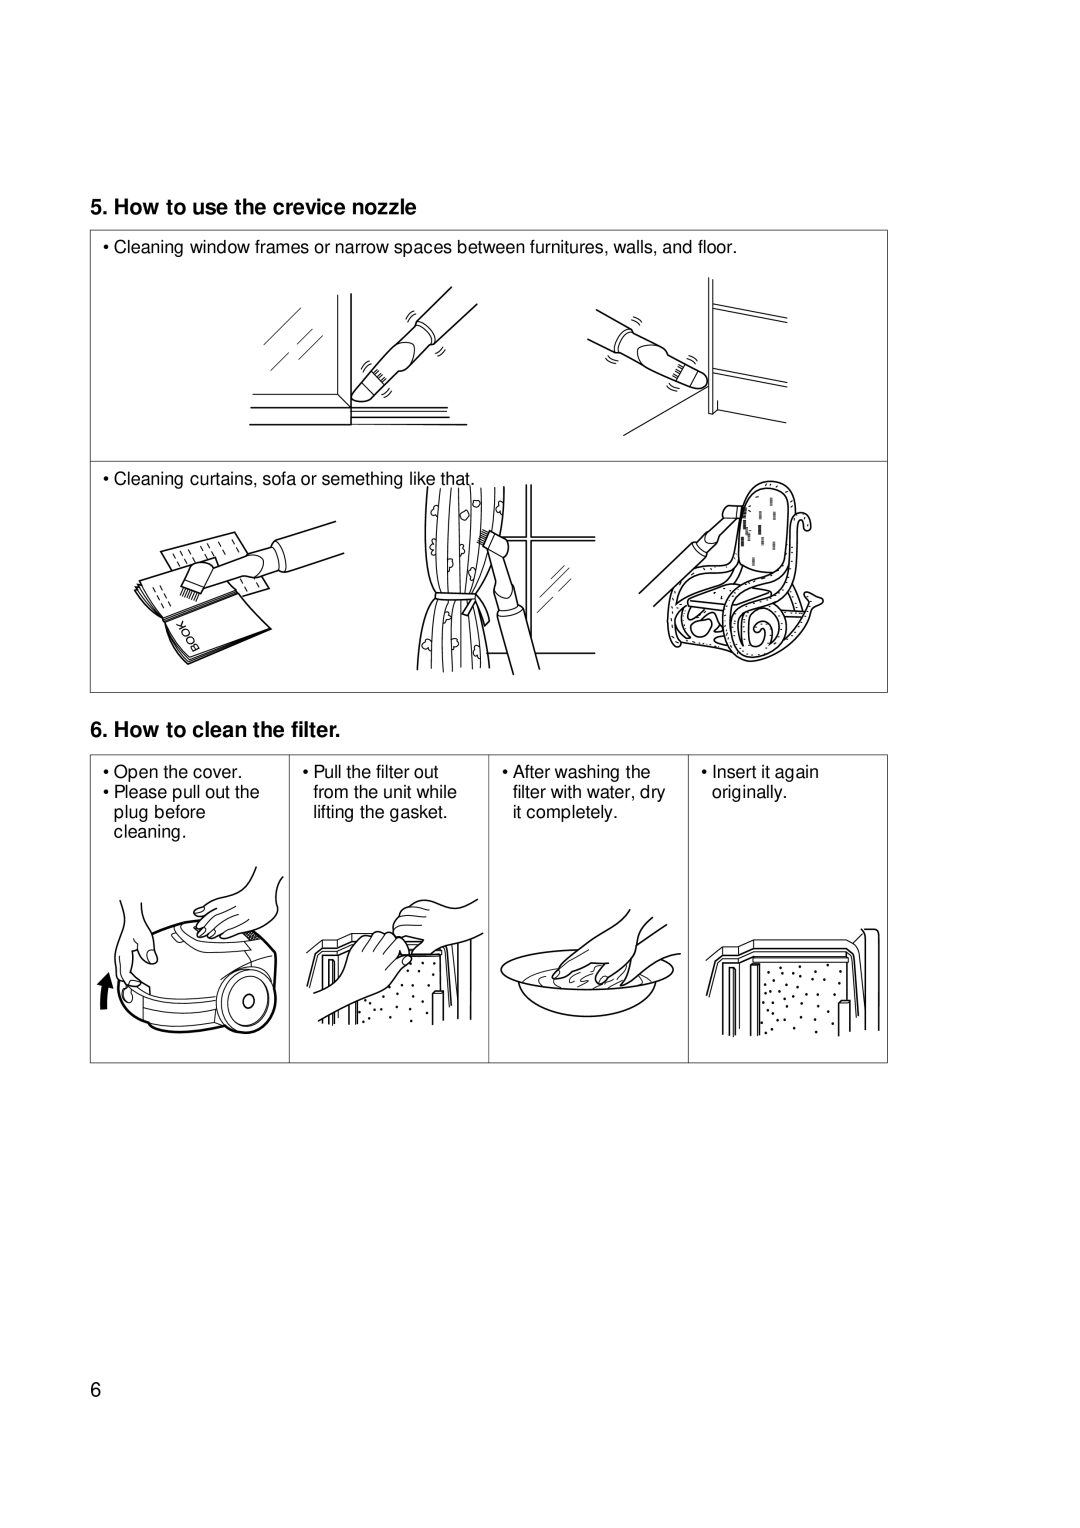 Daewoo RC-1O5 owner manual How to use the crevice nozzle, How to clean the filter 